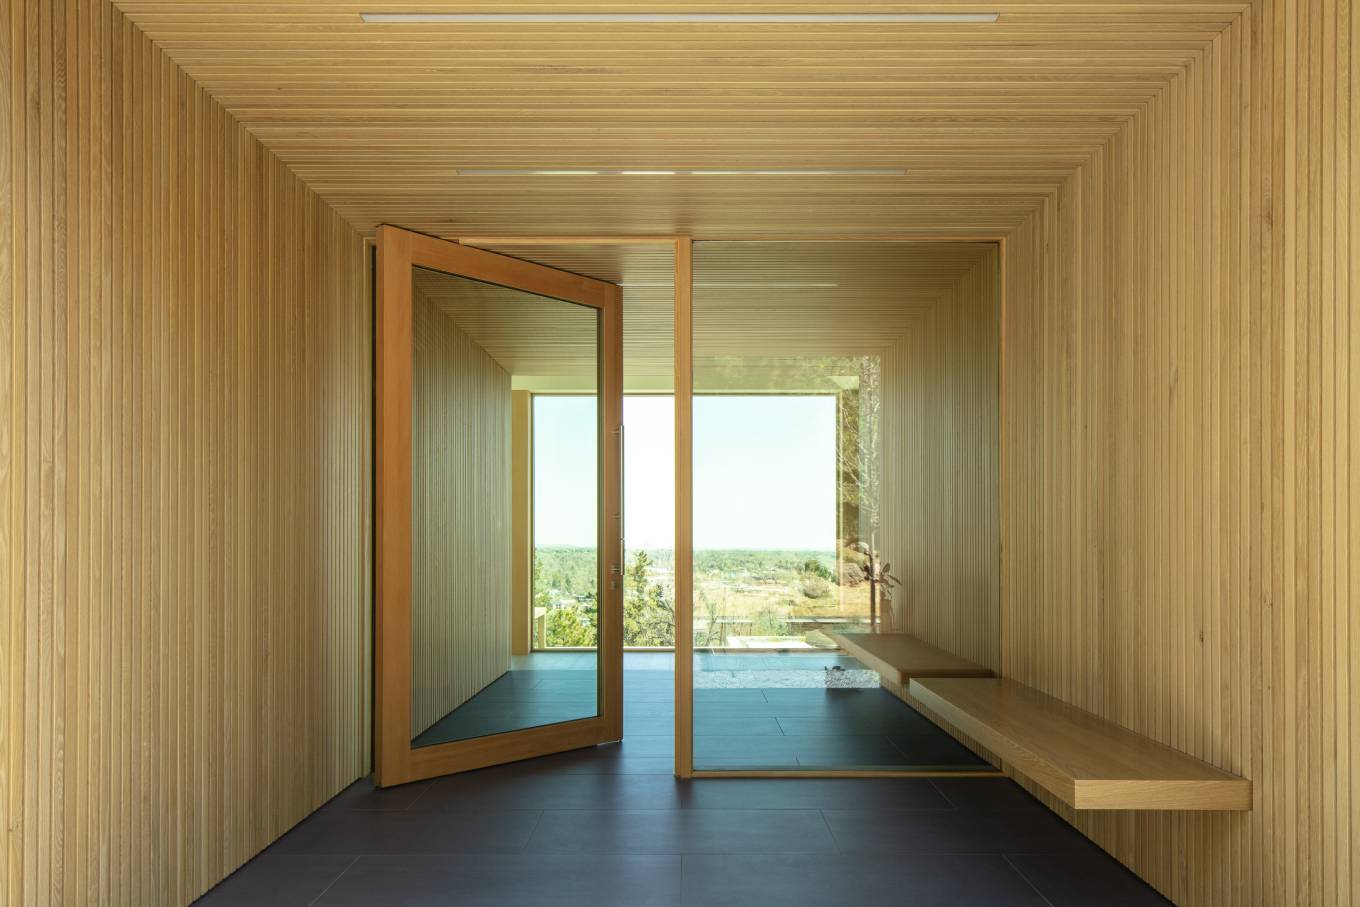 The palette is soft and warm, reflect the surroundings integrating into the alpine context.